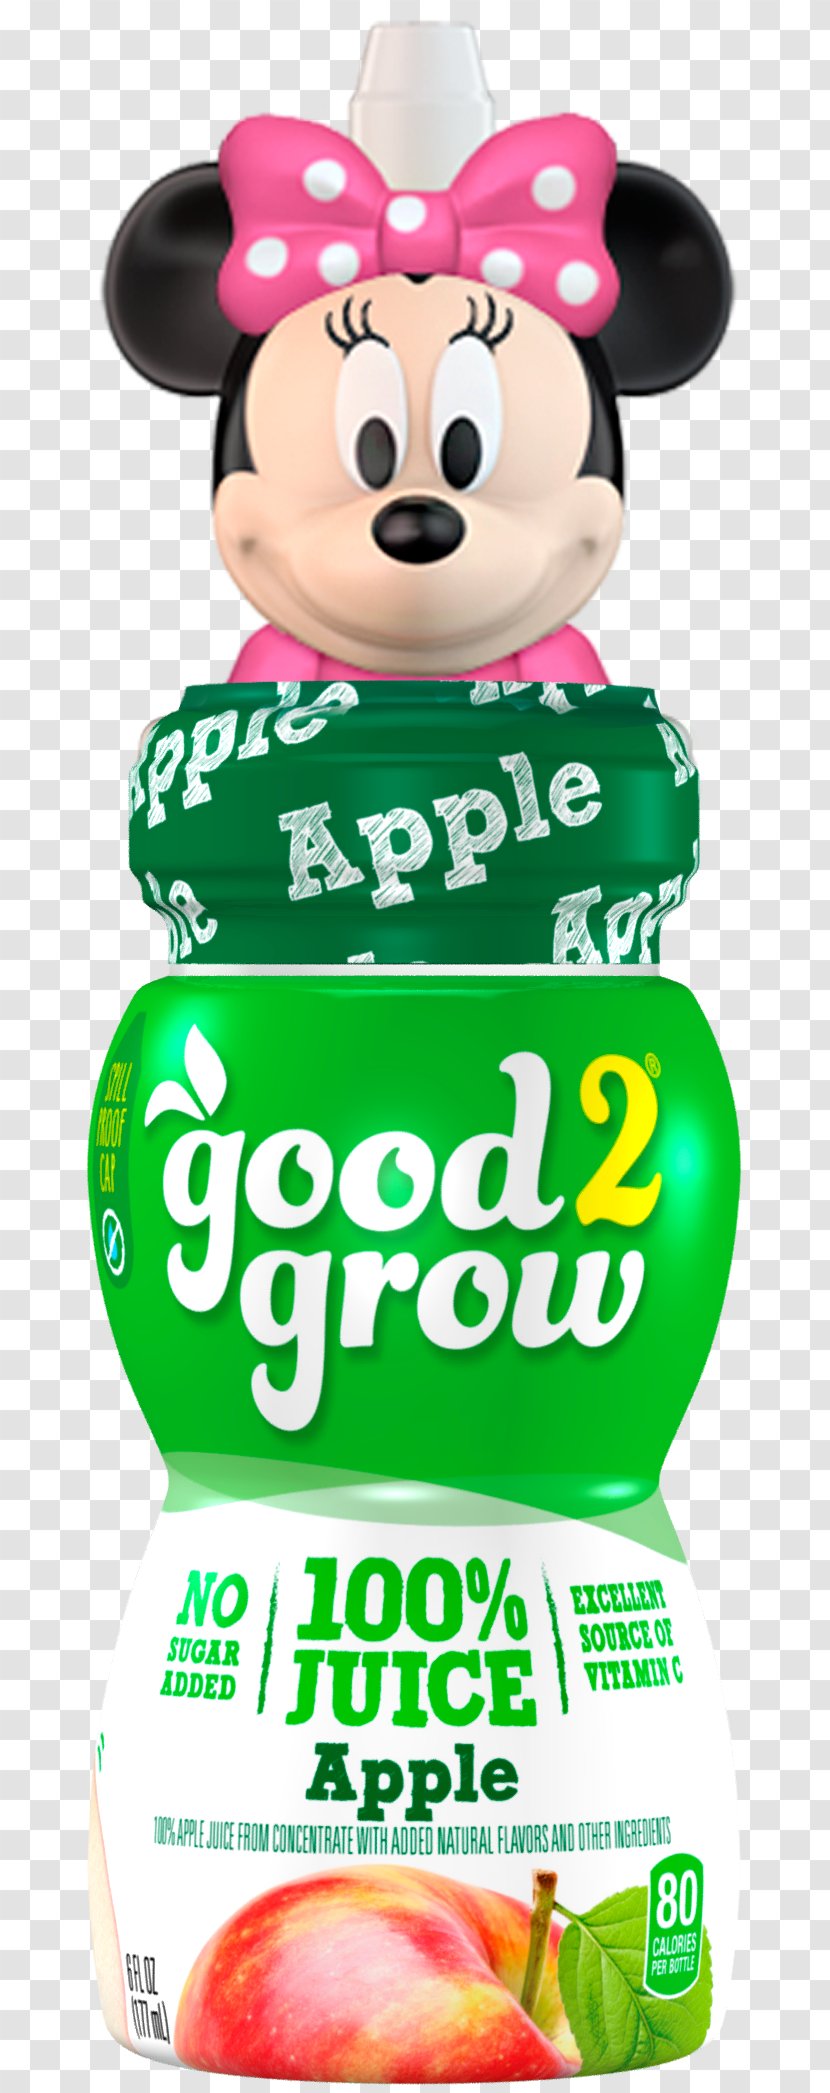 Apple Juice Kermit The Frog Font In Zone Brands, Inc. - Character - Paw Fruit Calories Transparent PNG